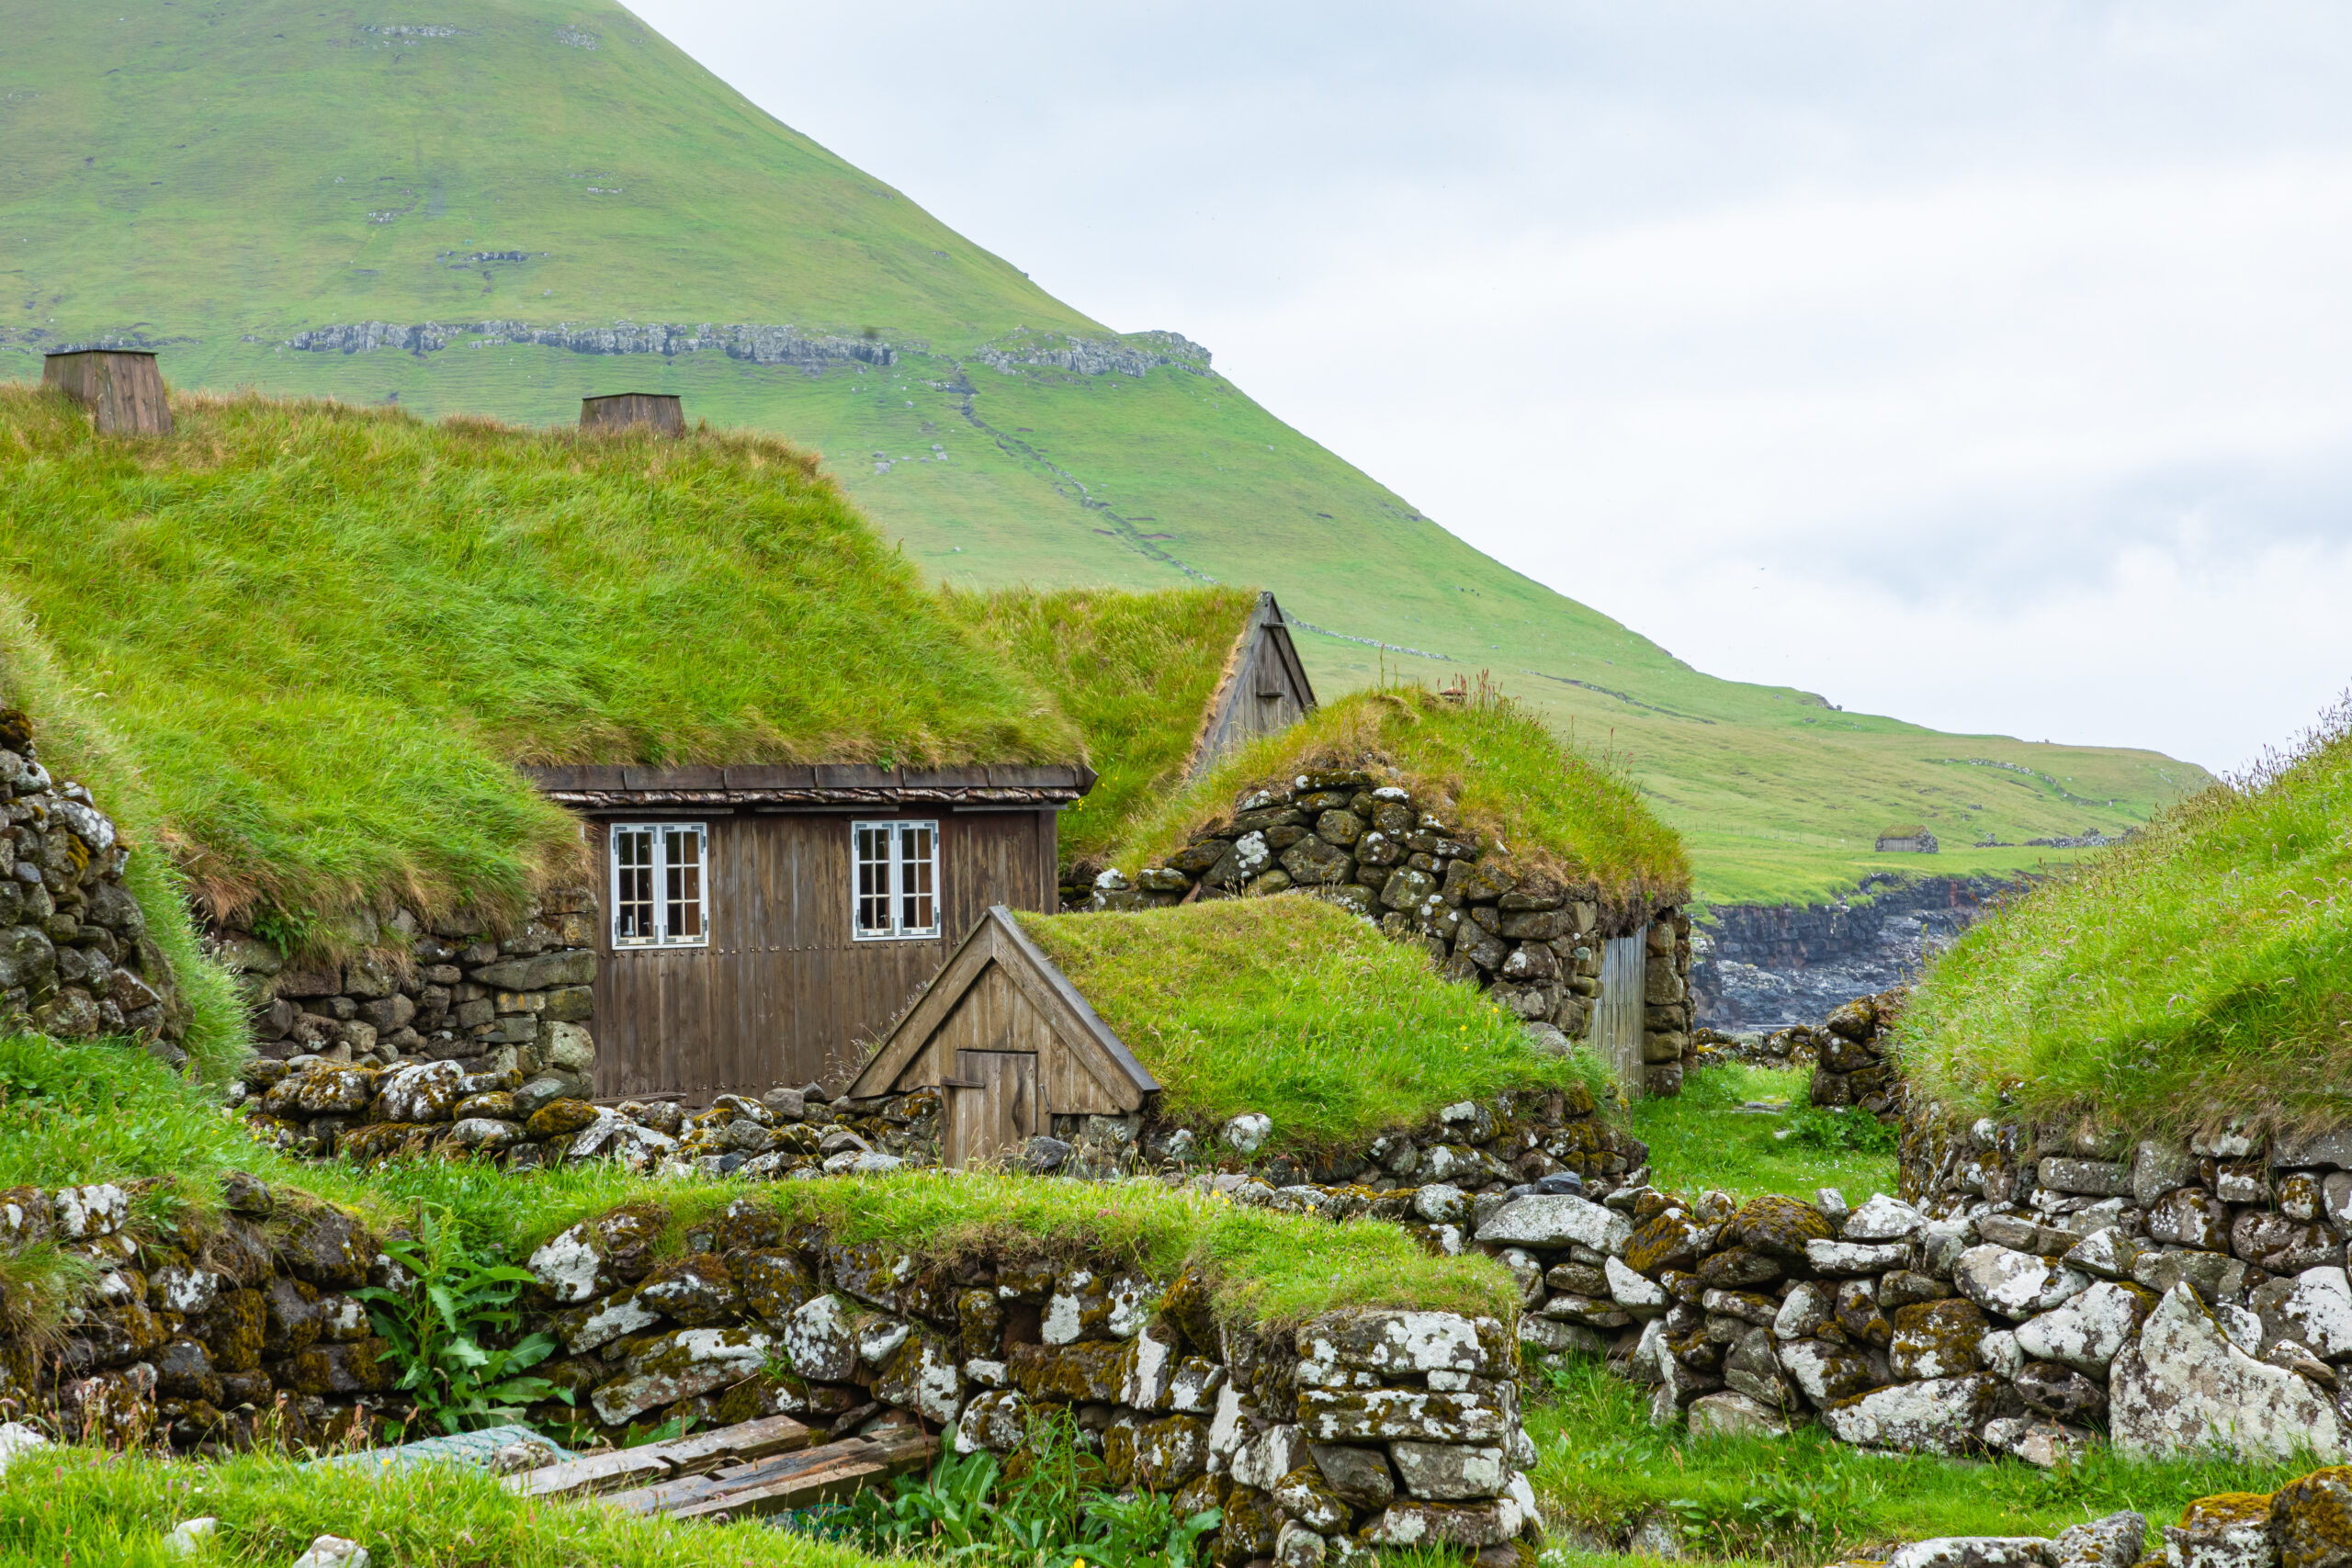 Houses and outbuilding with green roofs